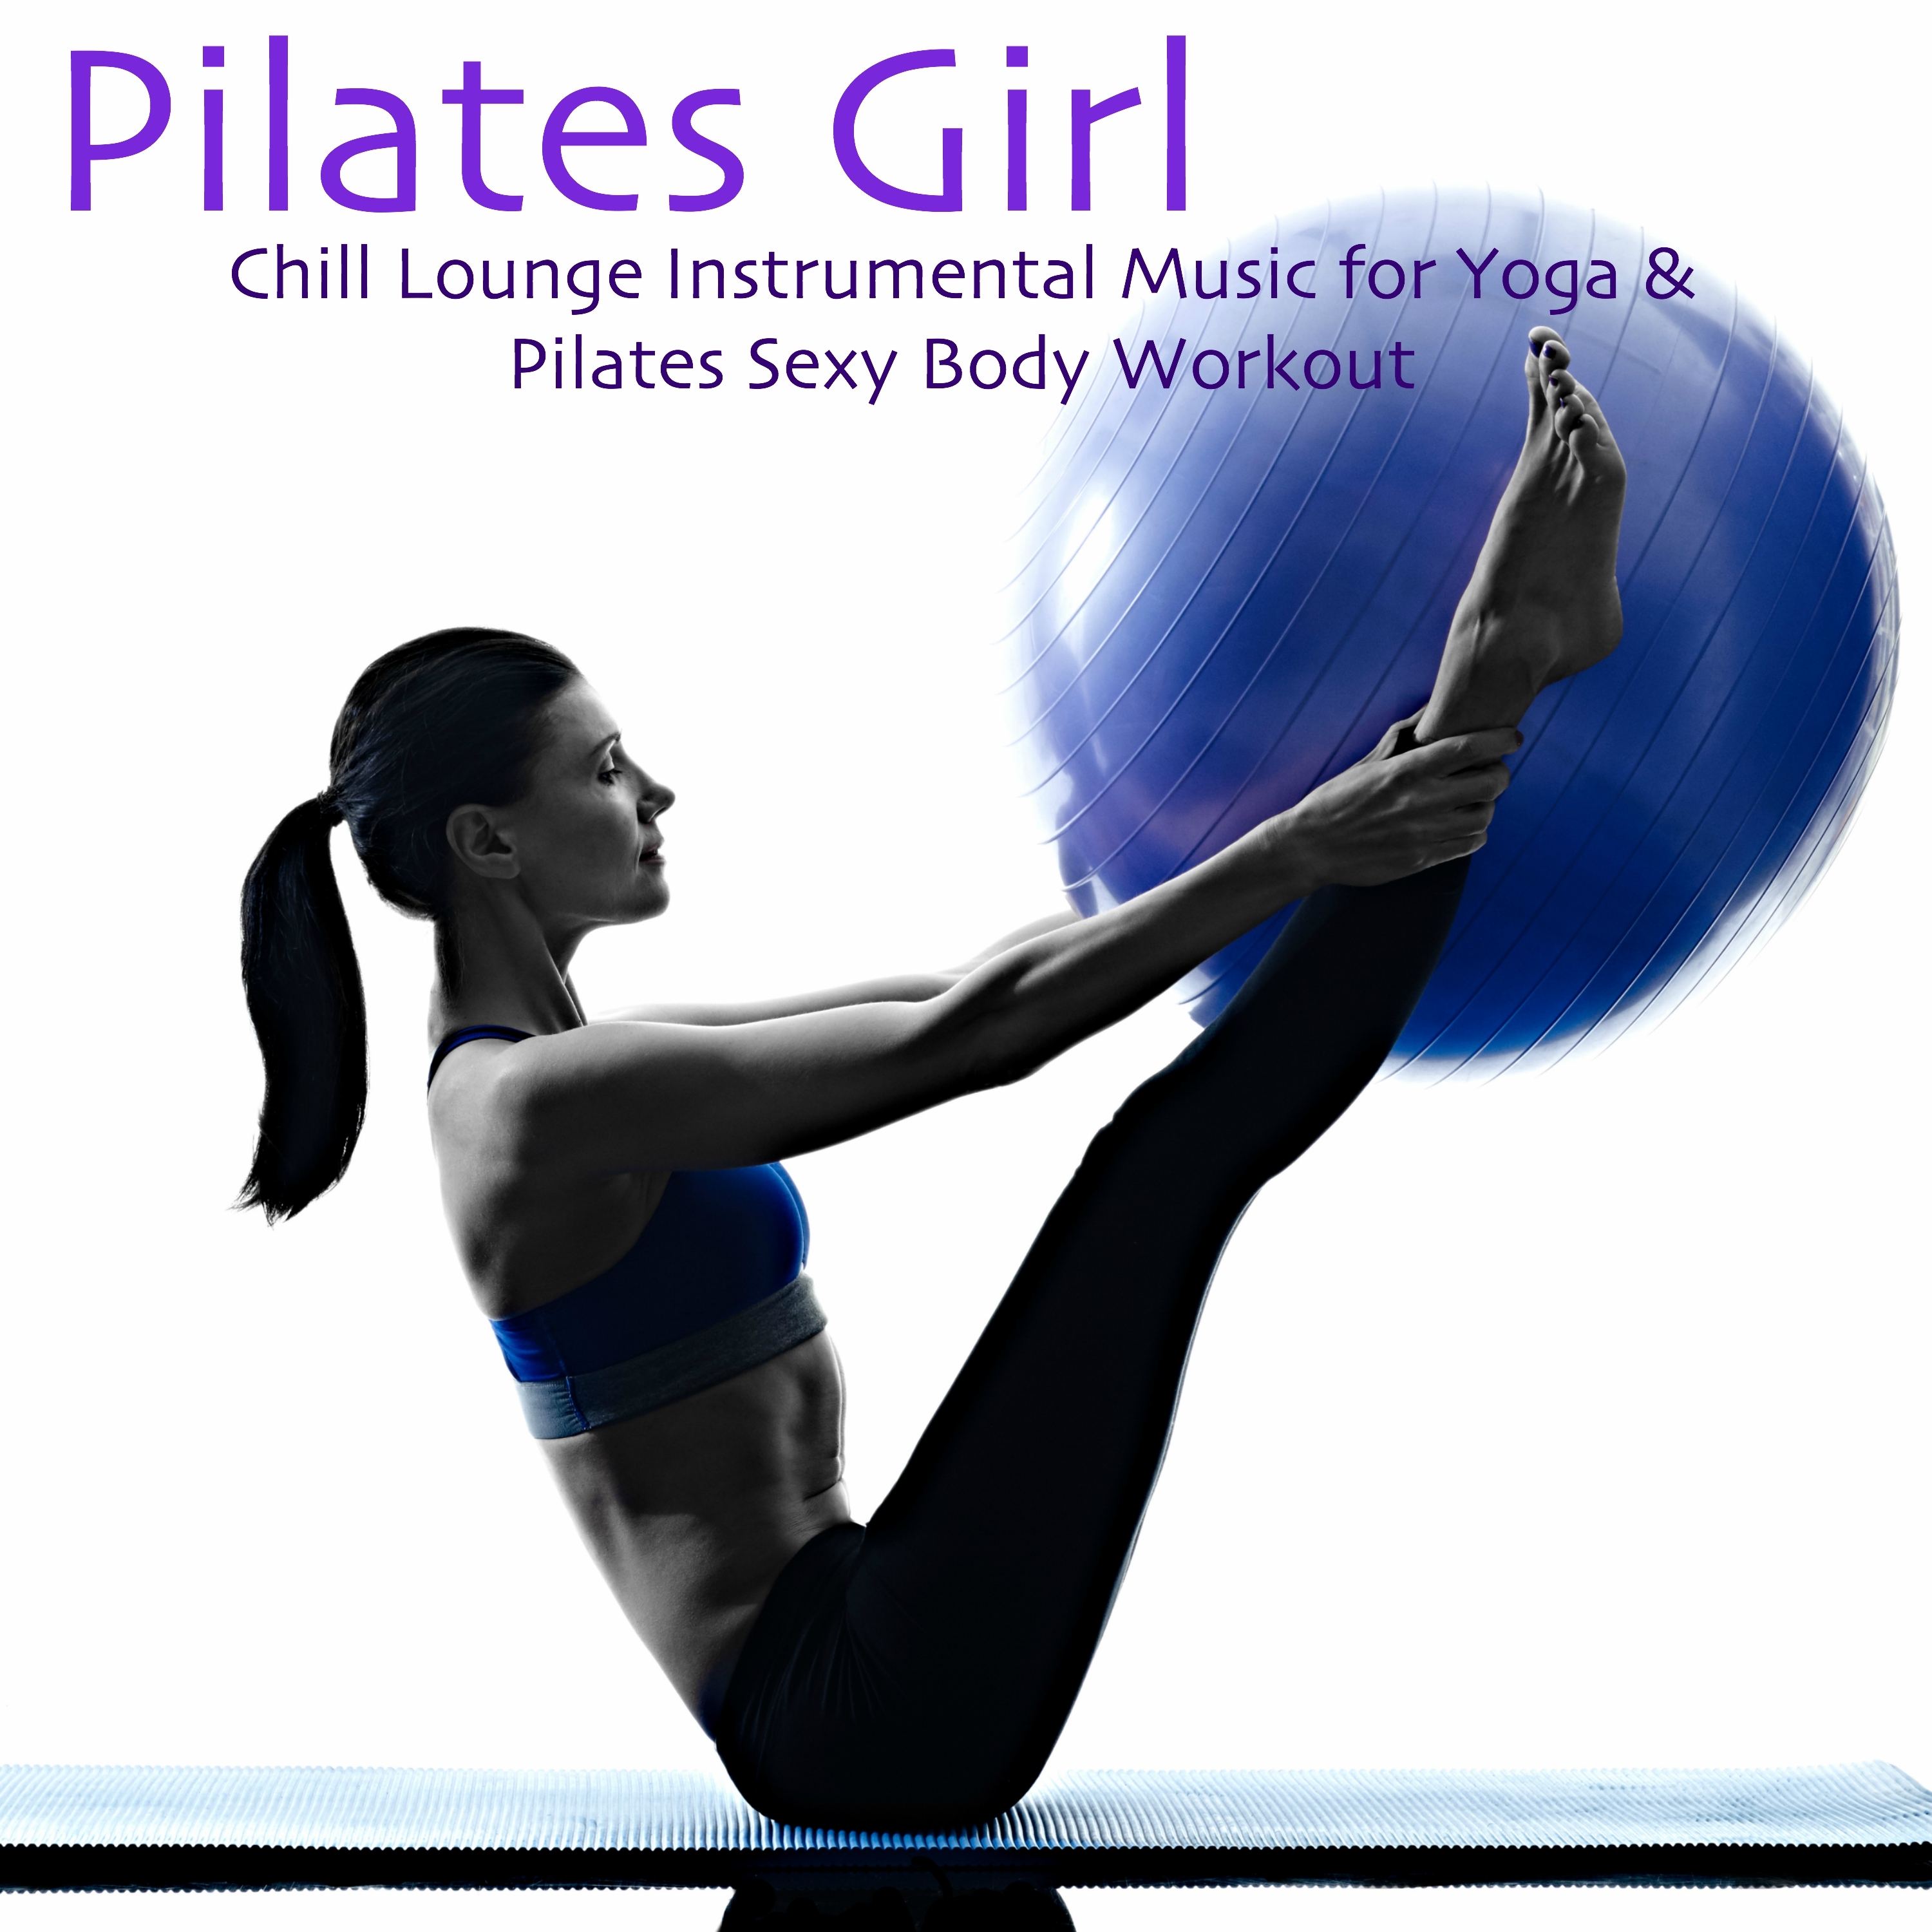 Pilates Girl – Chill Lounge Instrumental Music for Yoga & Pilates **** Body Workout